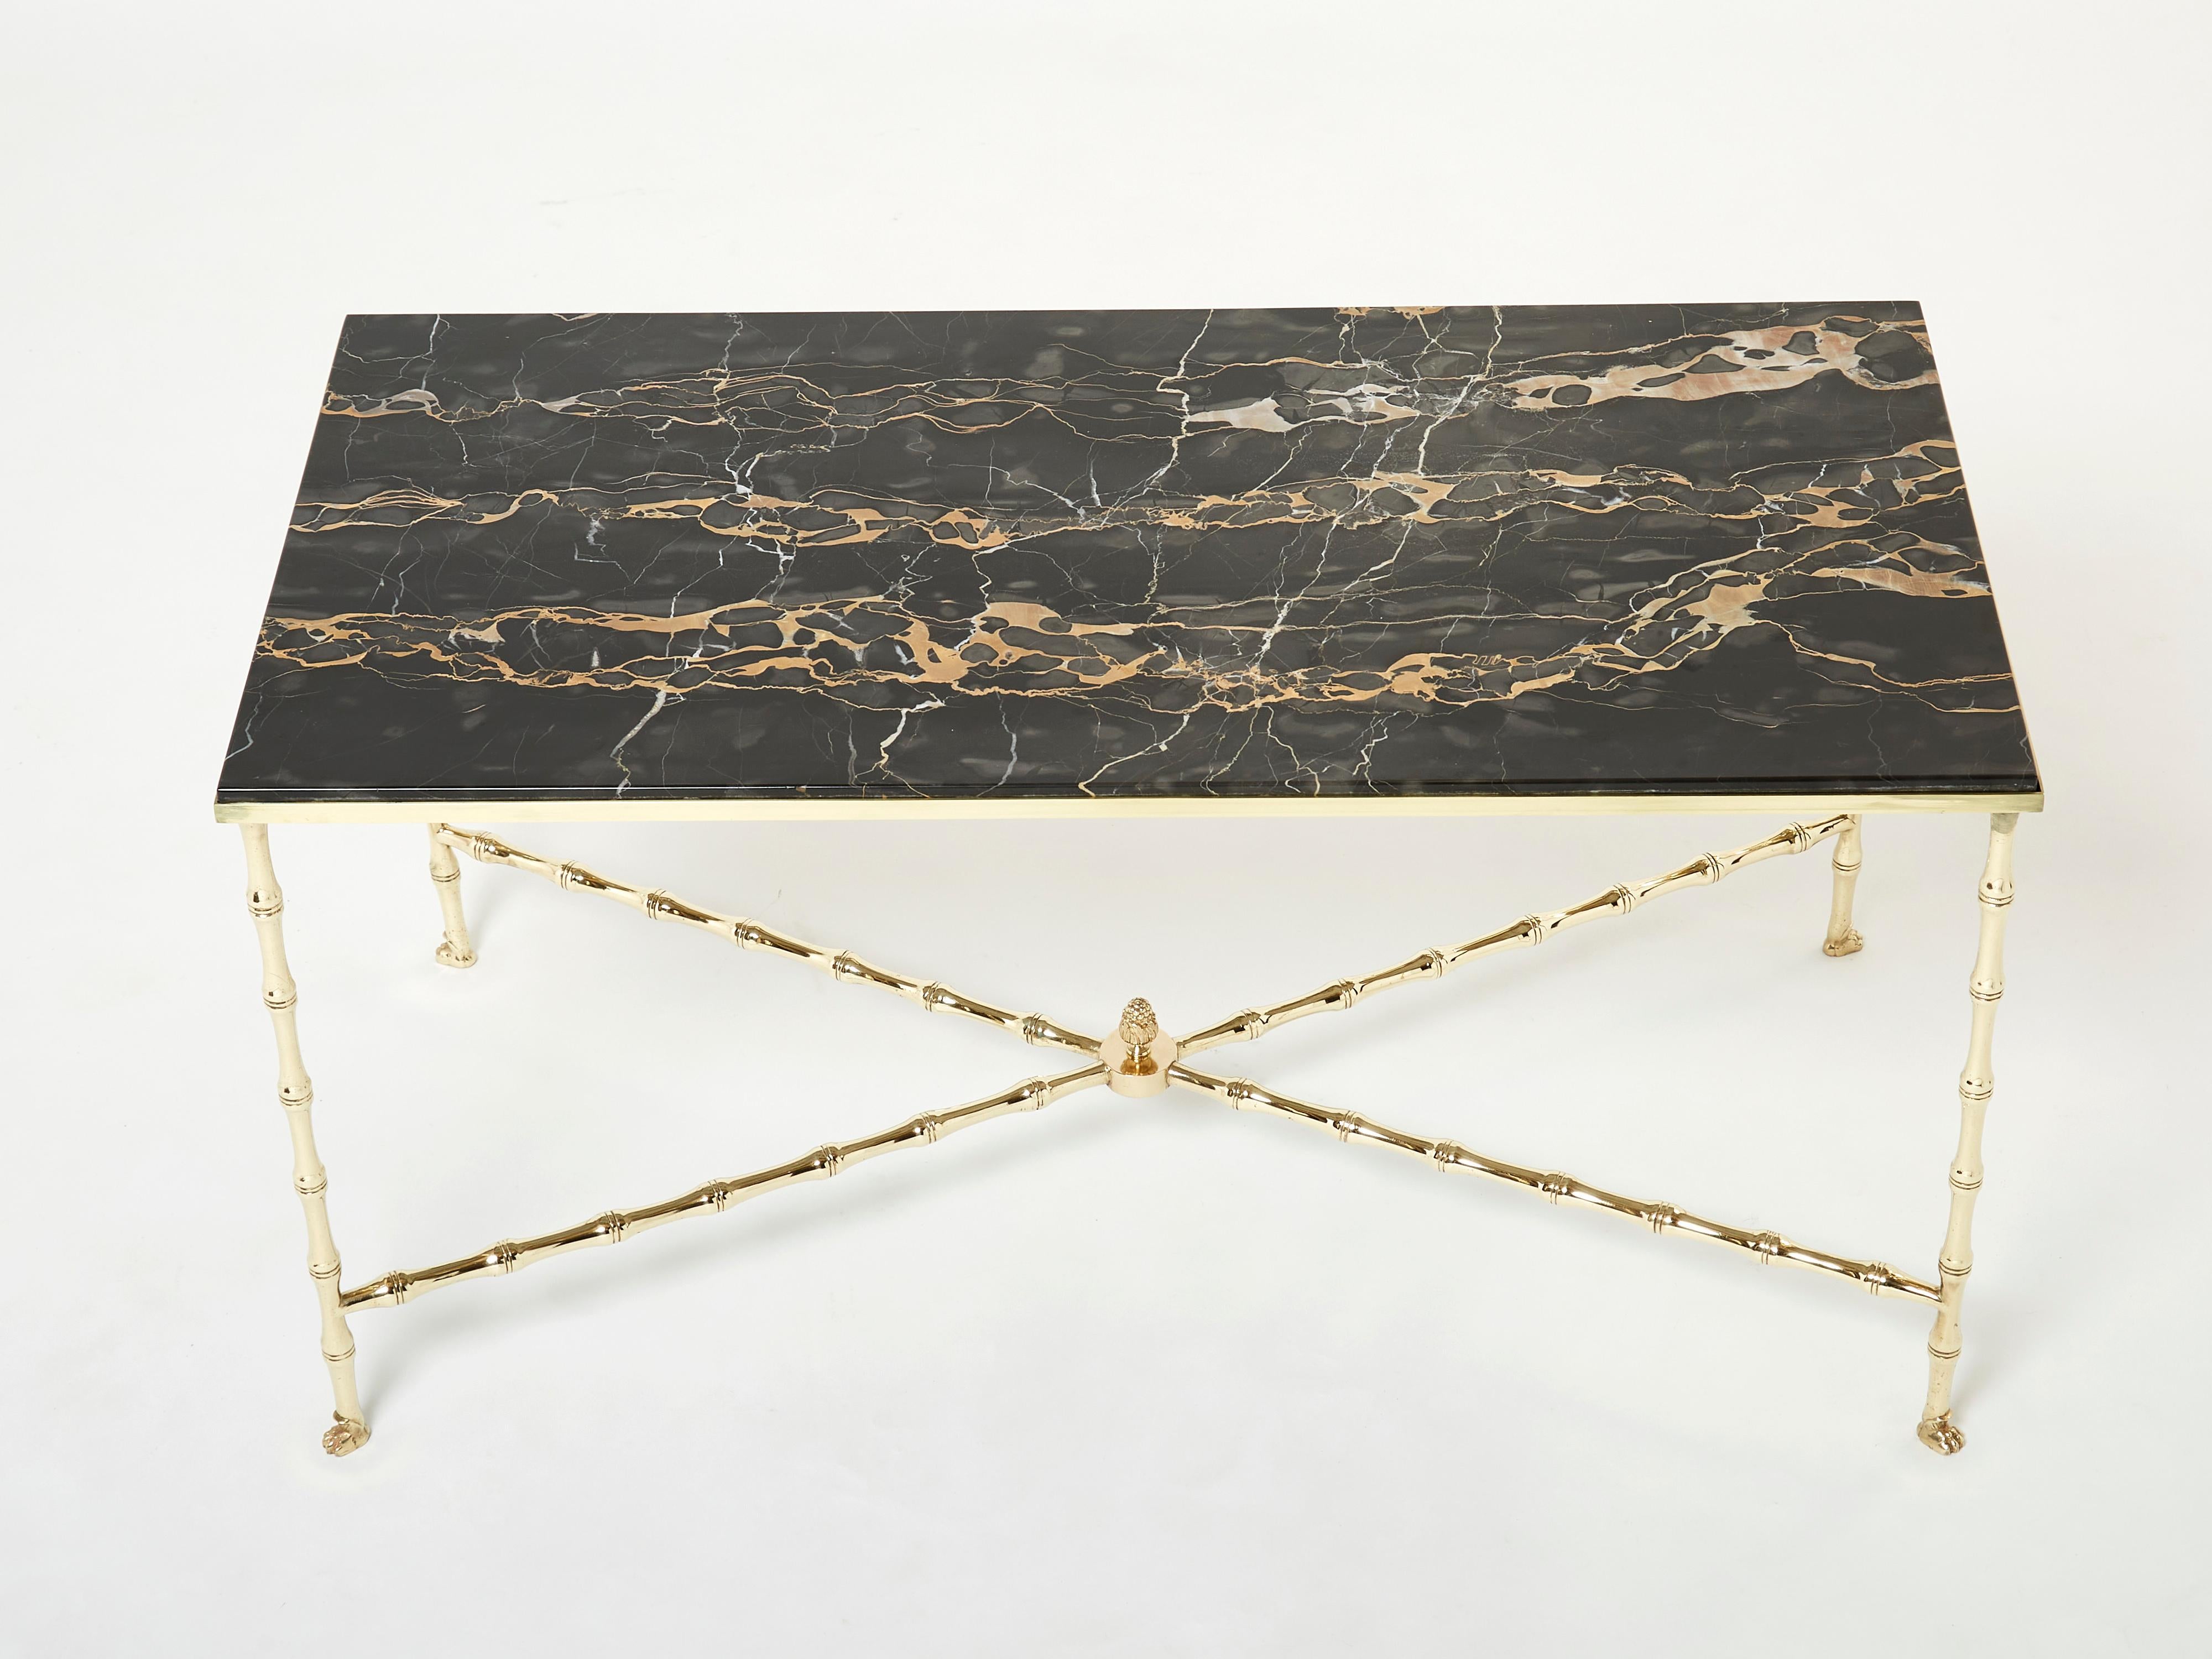 This beautiful coffee table by French house Maison Baguès was created with solid bamboo shaped brass and a beautiful black Portor marble top in the early 1960s. The black top is timeless and smooth, while the brass bamboo feet details provide an